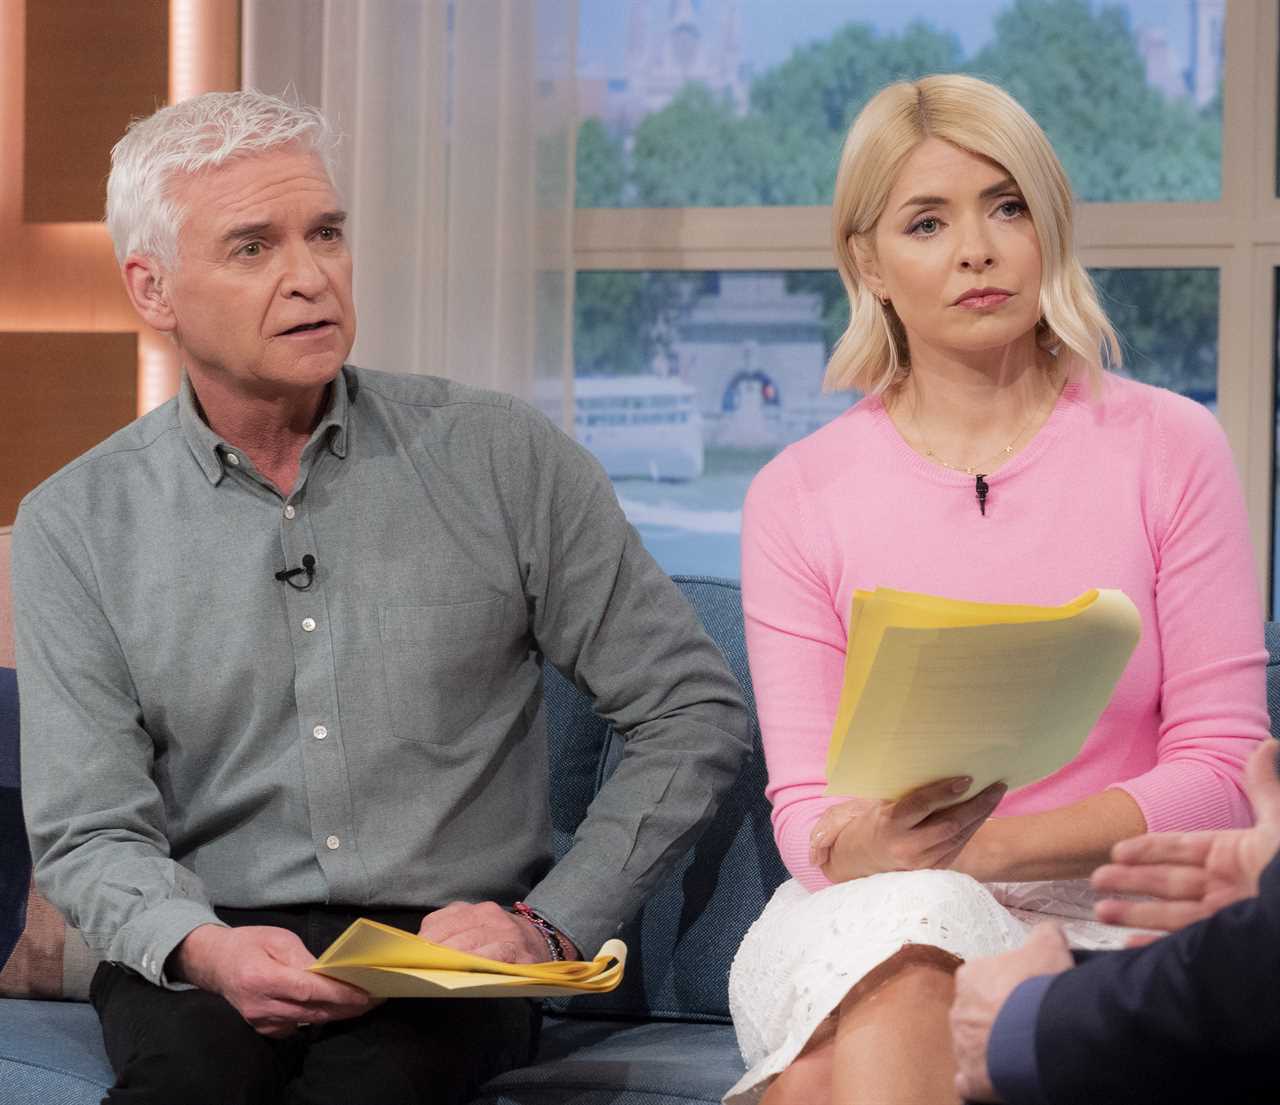 Nadine Dorries reveals how Phillip Schofield ‘bullied’ co-presenter on This Morning set